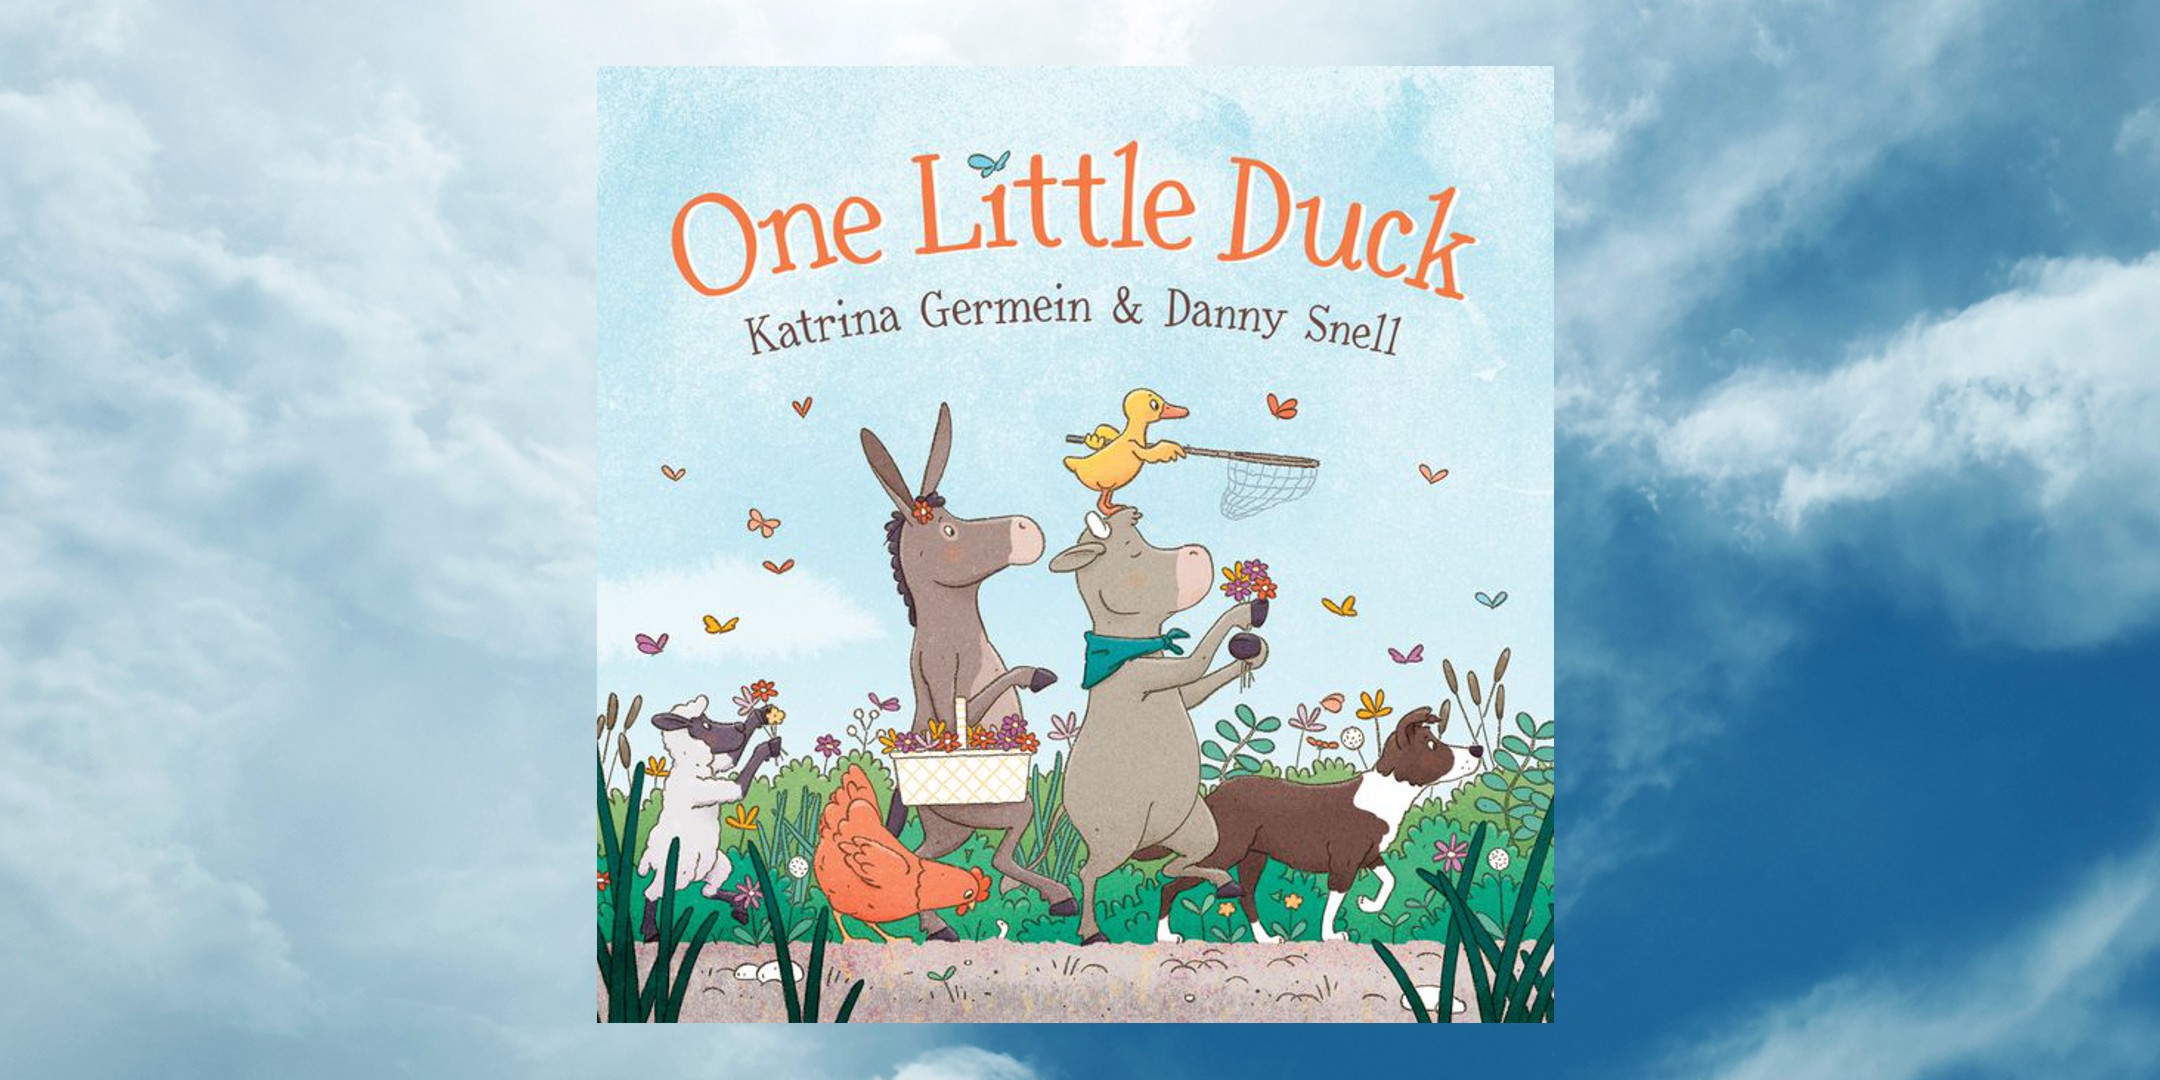 One Little Duck by Katrina Germein and Danny Snell on a sky background